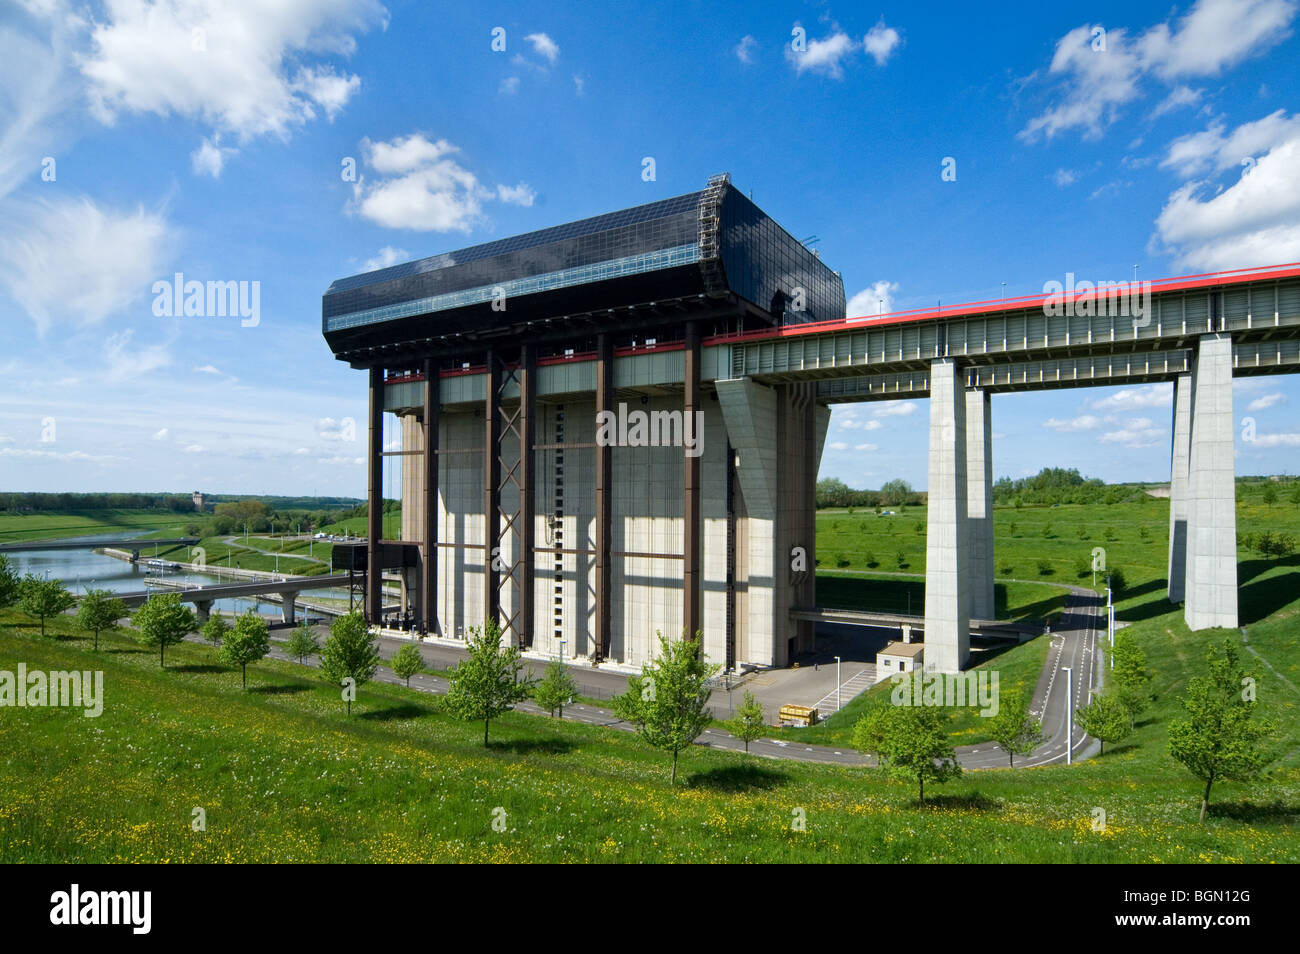 Strépy-Thieu, tallest boat lift in the world, at the Canal du Centre, Le Rœulx, Hainaut, Belgium Stock Photo